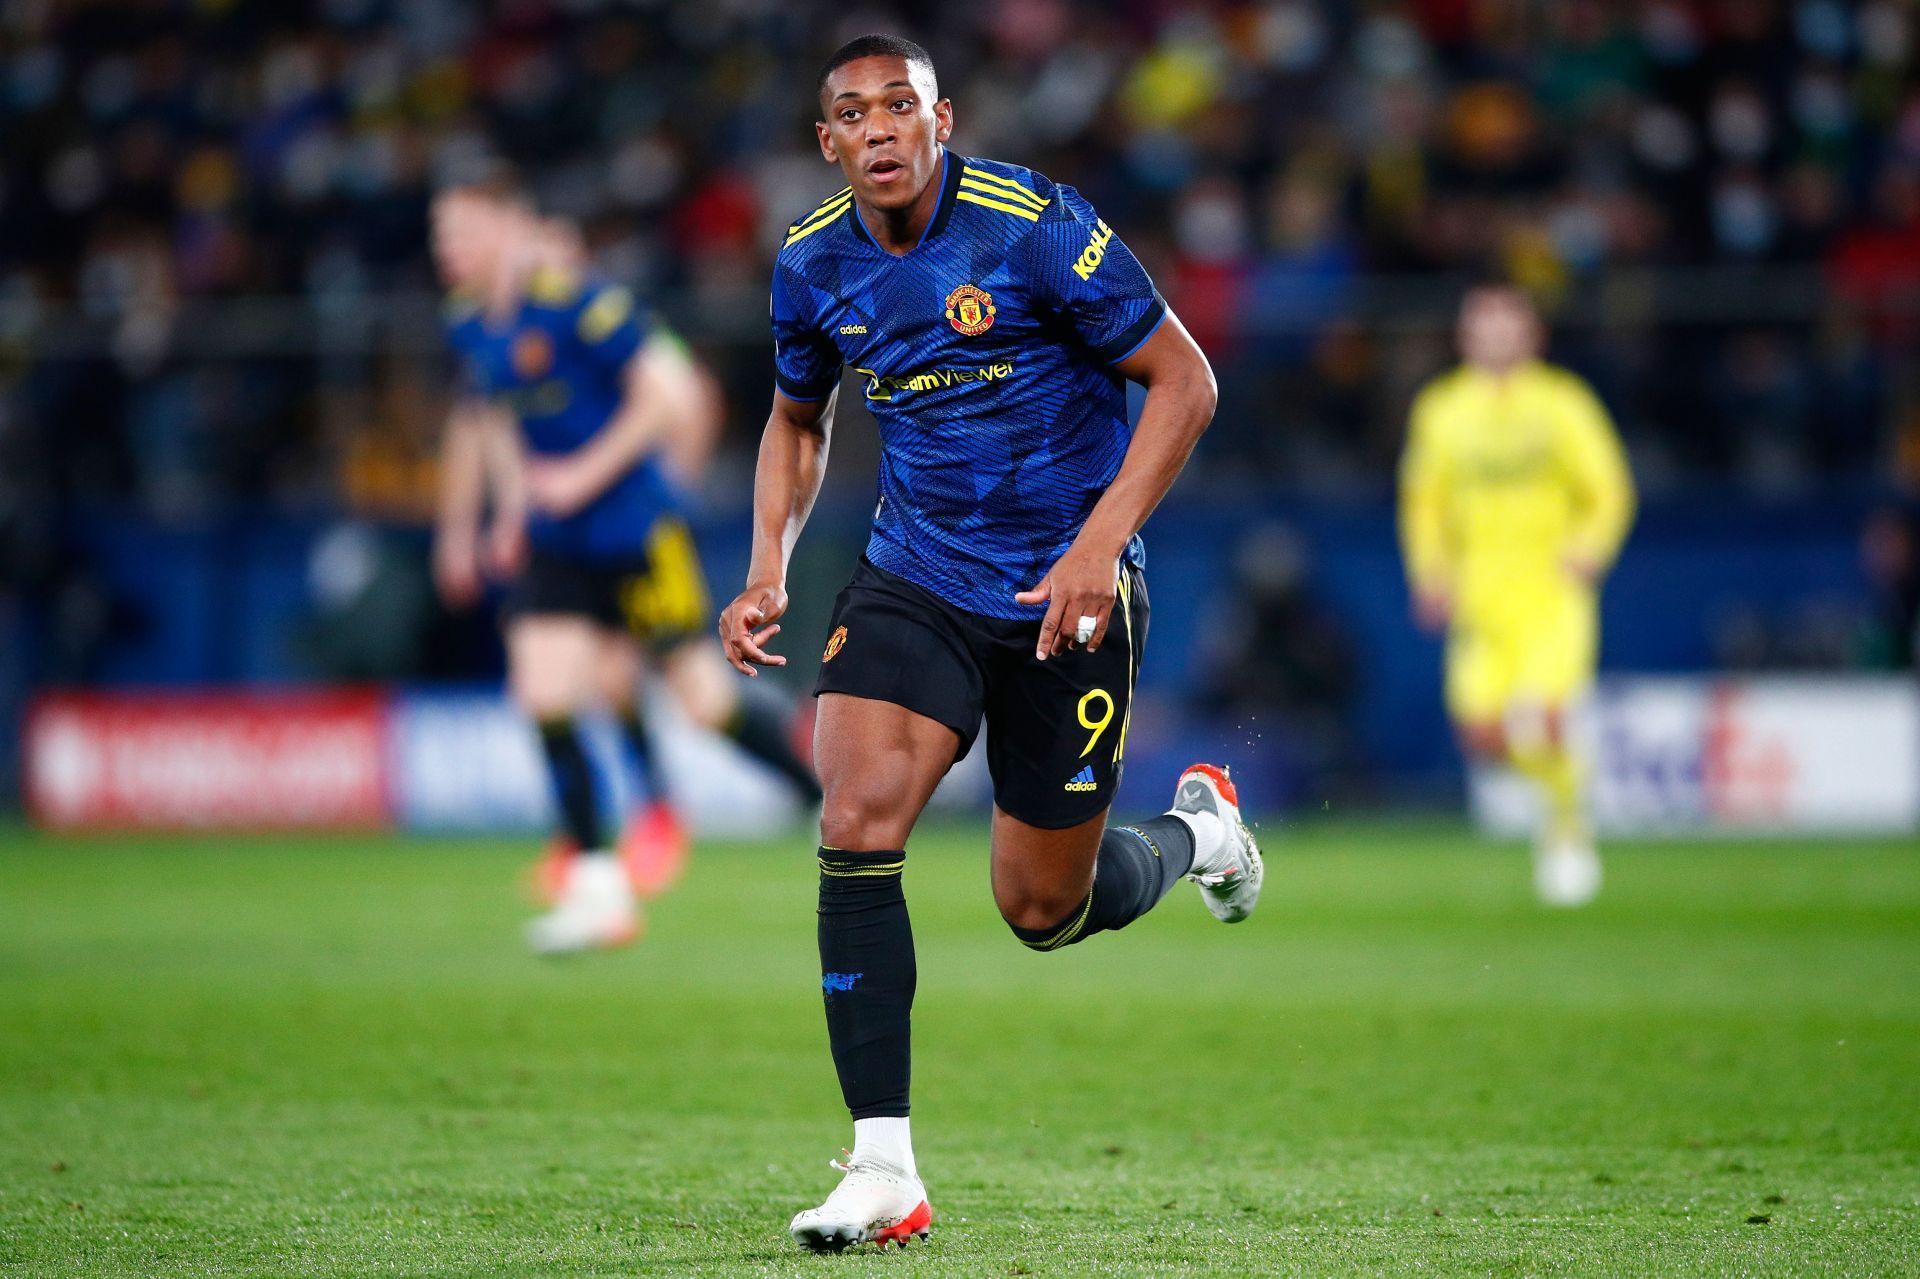 Manchester United have turned down an offer from Sevilla to take Anthony Martial on loan.